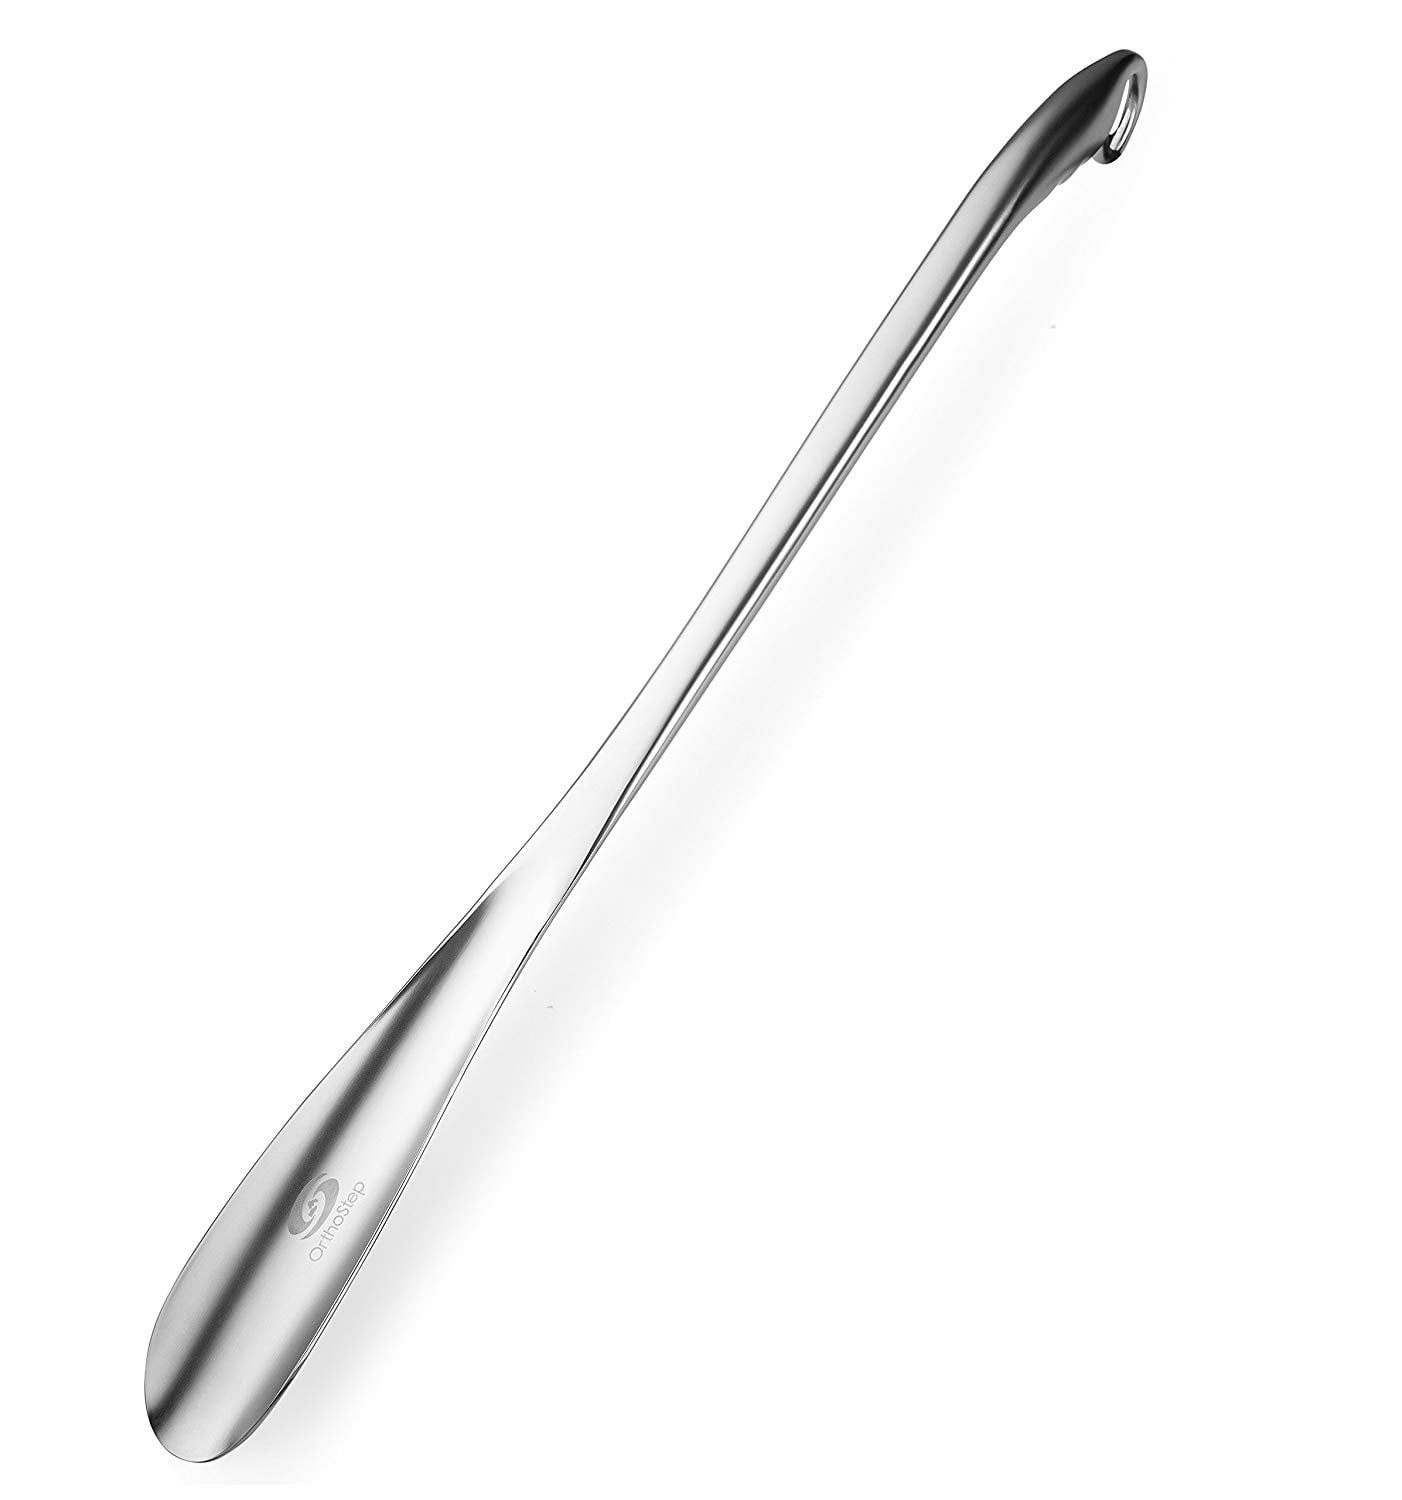 OrthoStep 24 inch Extra Long Shoe Horn Long Handle Metal